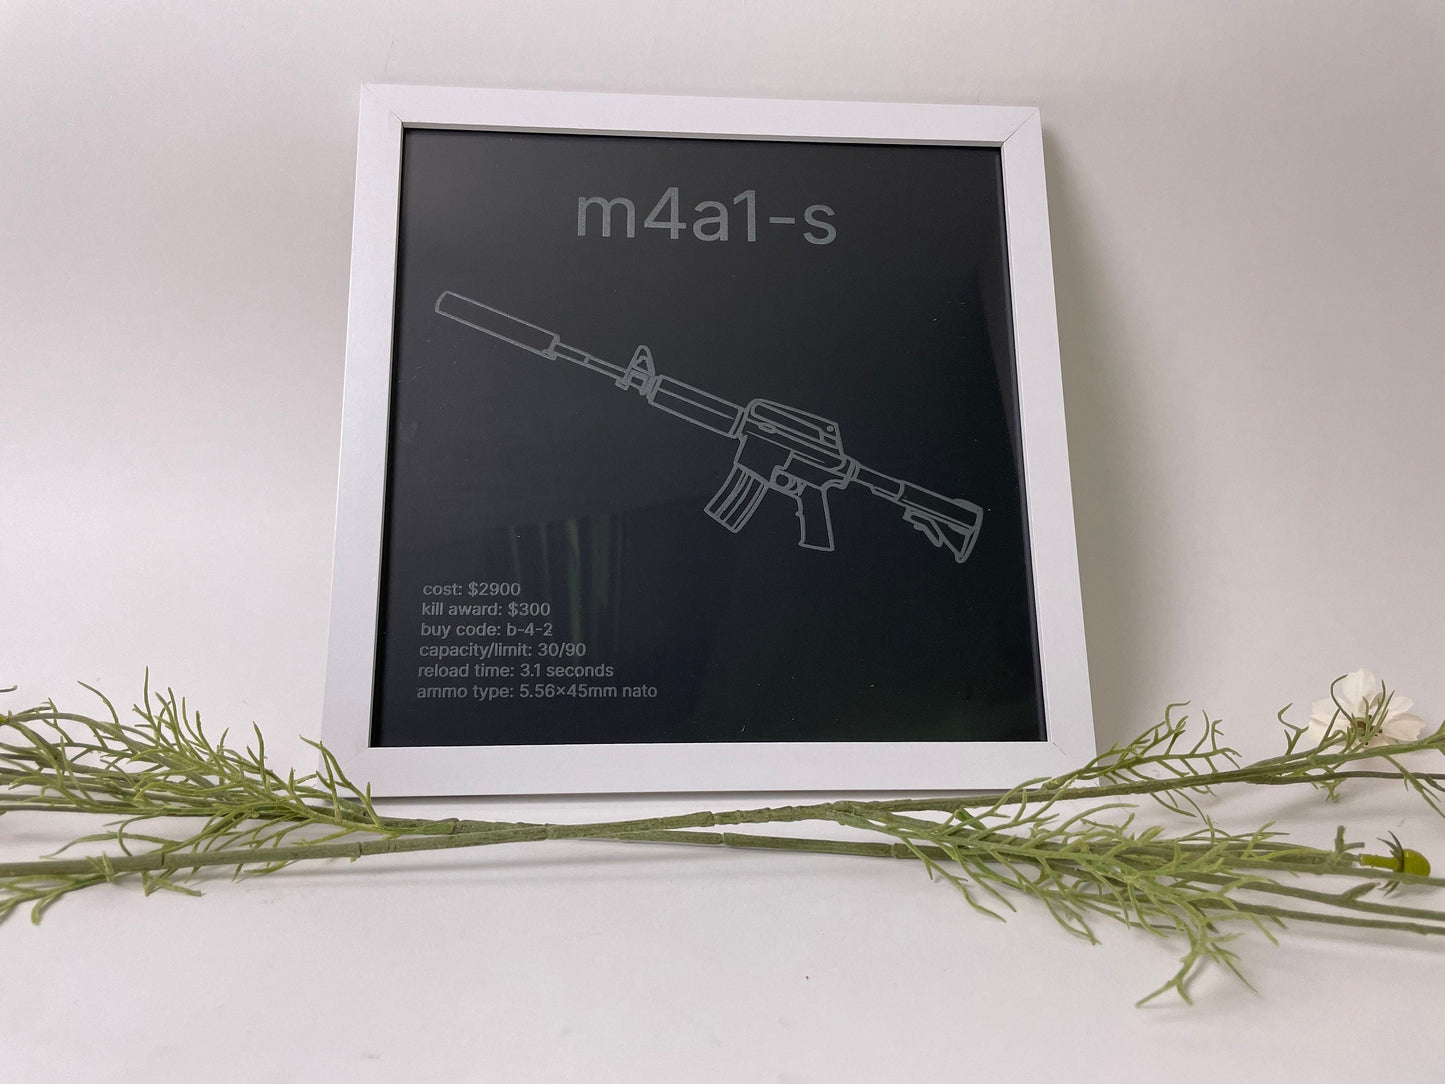 Counter-Strike Armory, M4A1-S, Framed Etched Glass Wall Decor